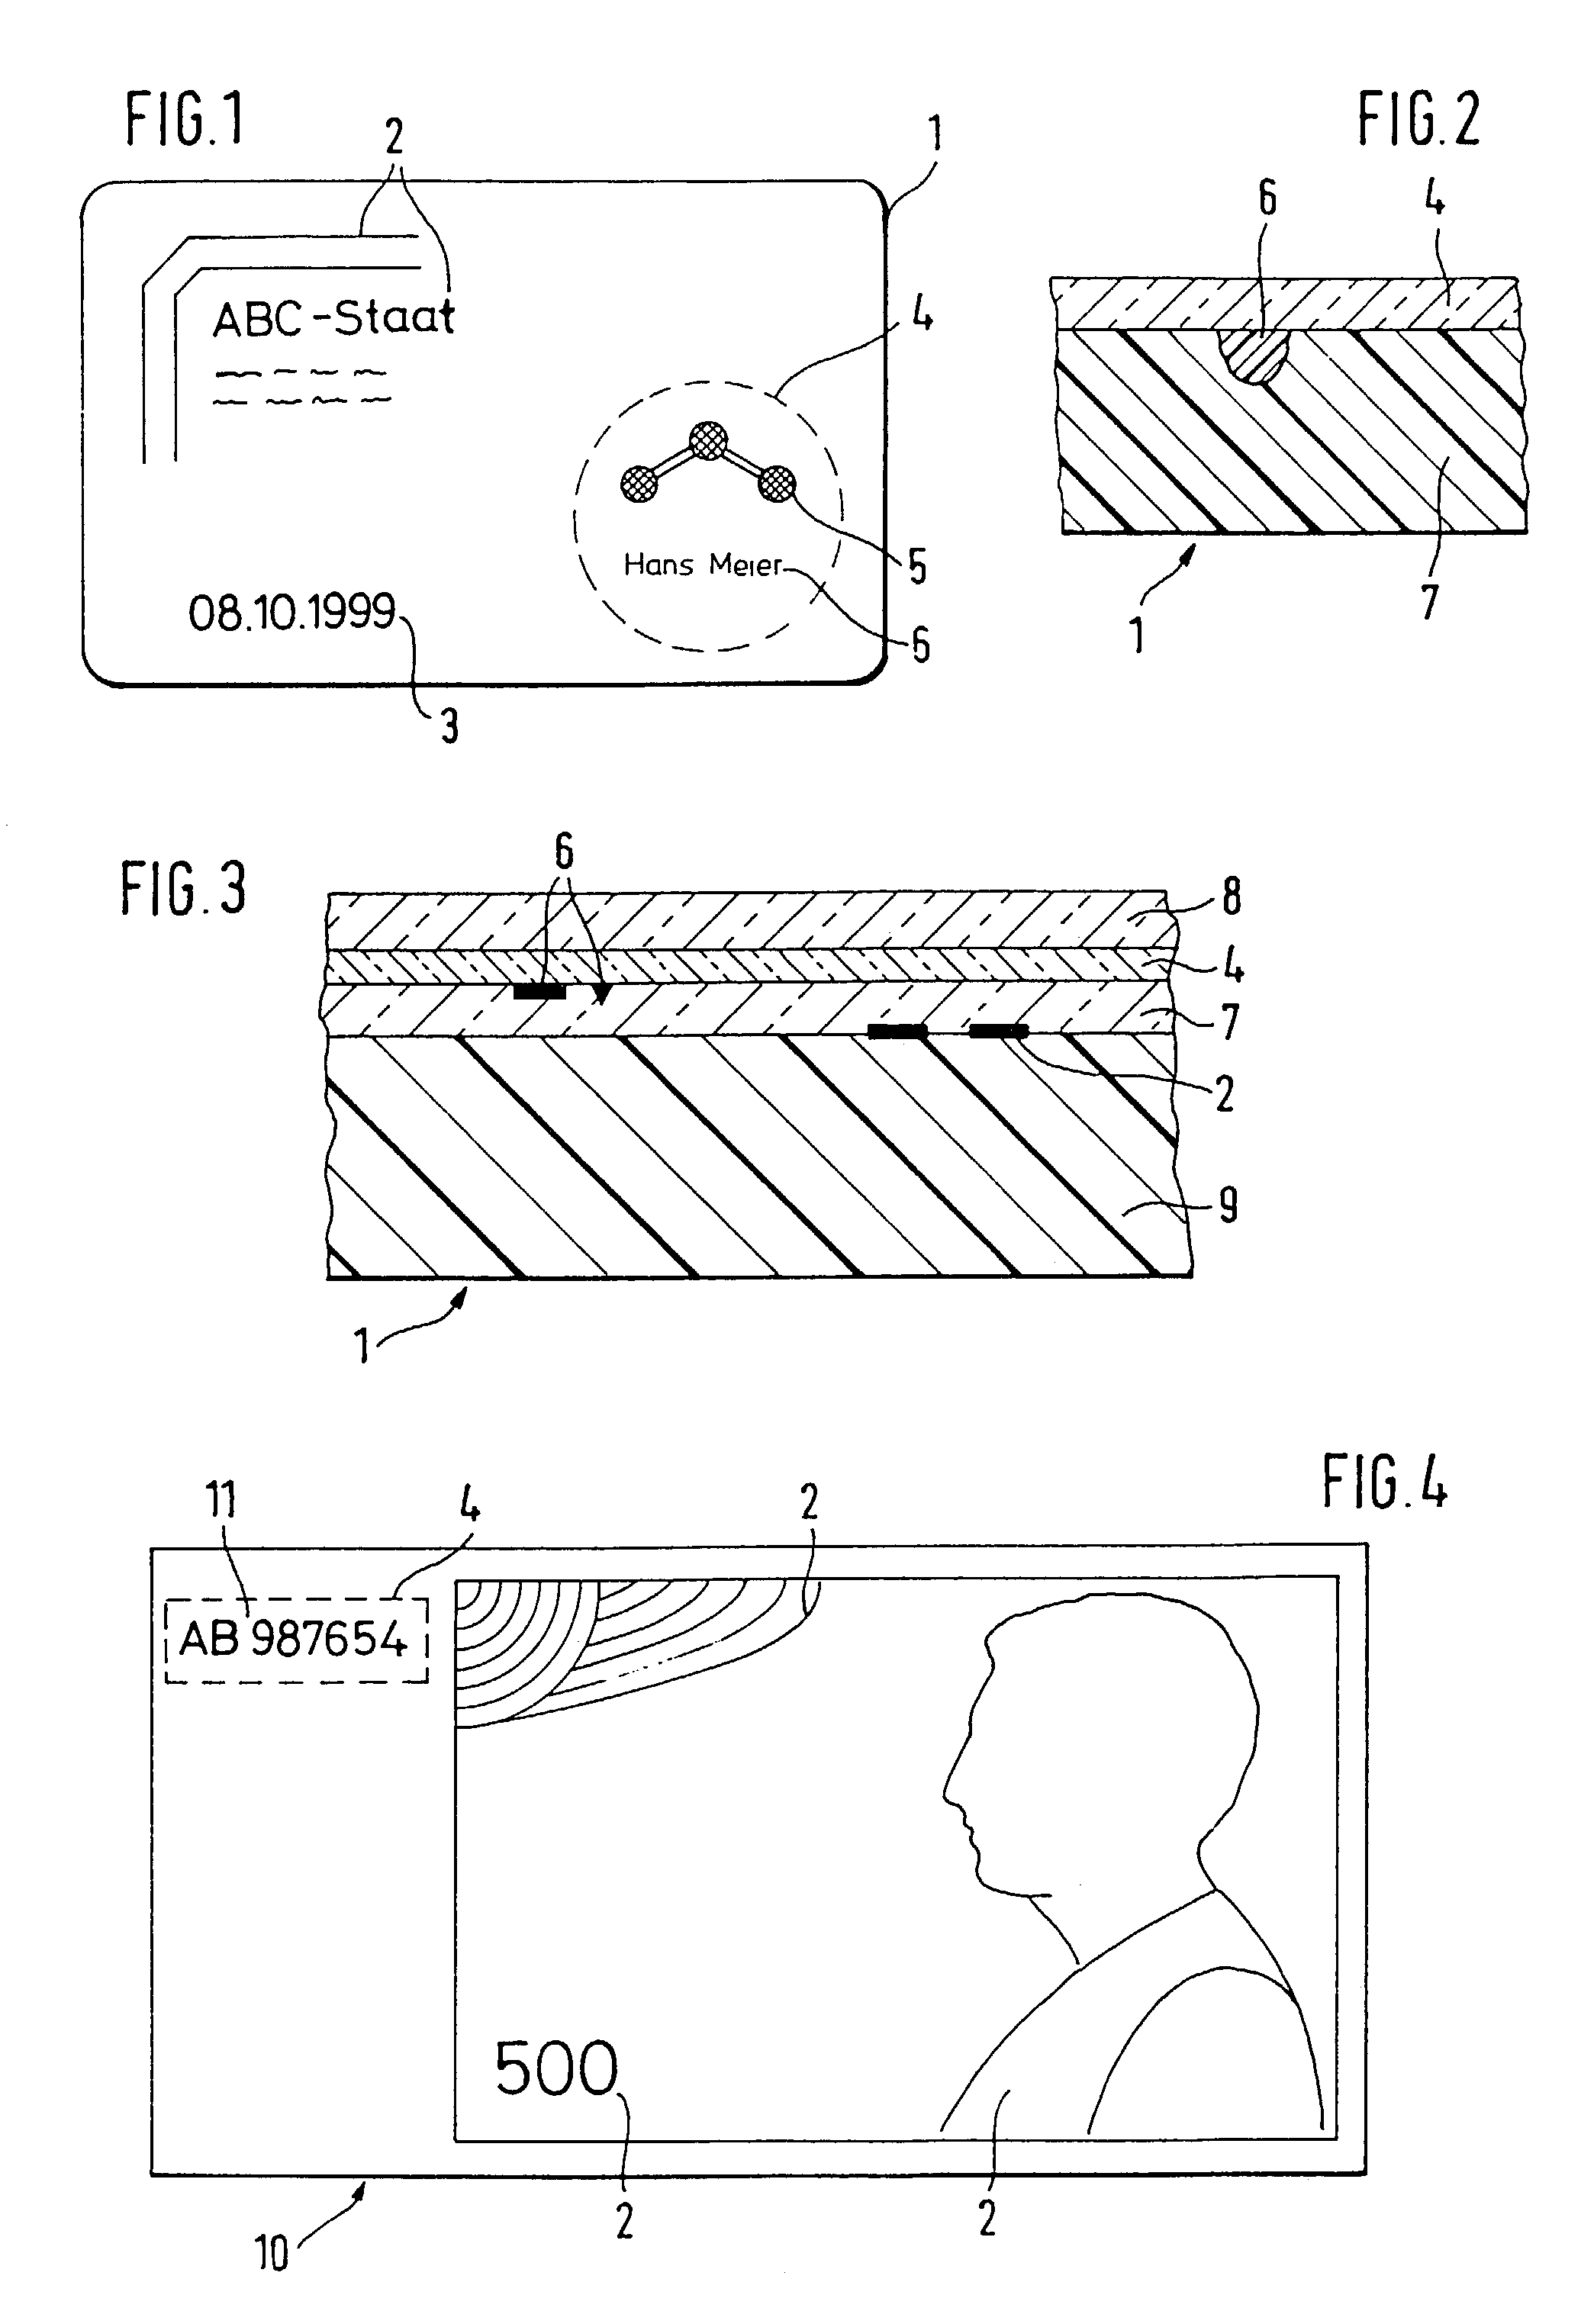 Method for producing laser-writable data carriers and data carrier produced according to this method